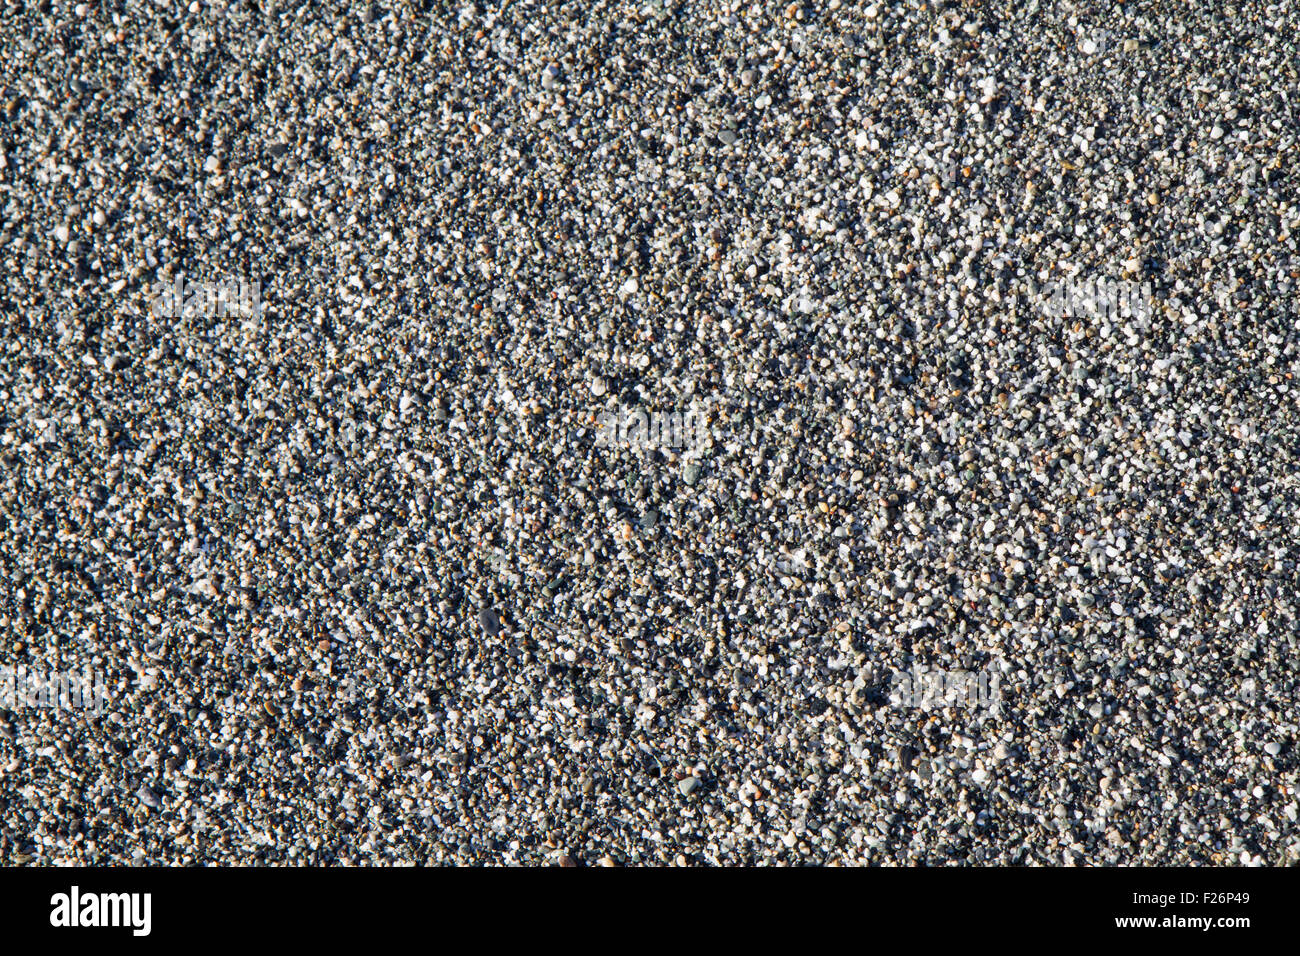 background of wet beach, made up of small gray stones Stock Photo